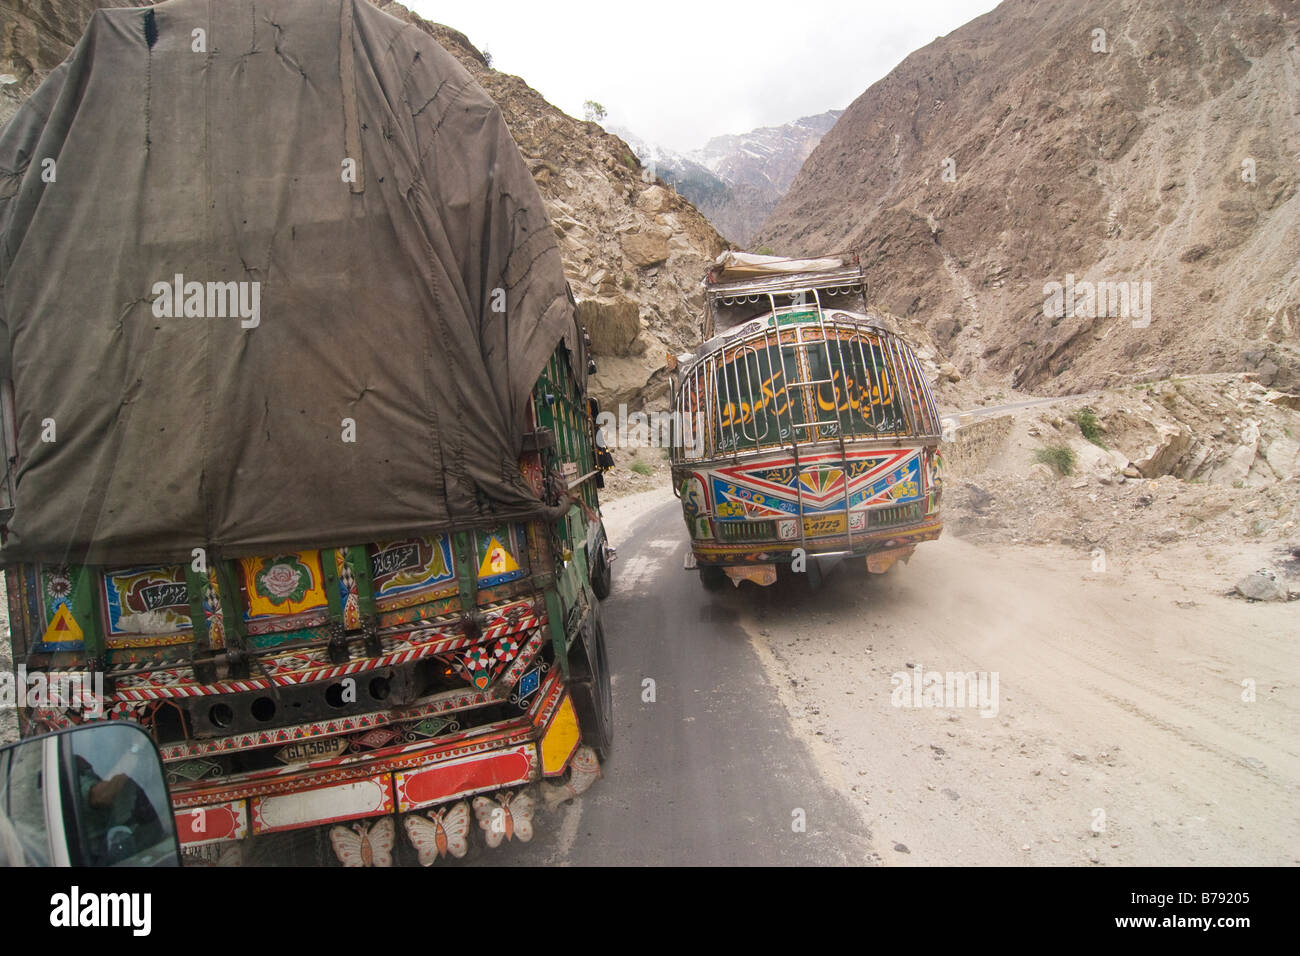 A bus passing an ornate Pakistani cargo transport truck on the one lane Skardu road in Baltistan in Pakistan Stock Photo